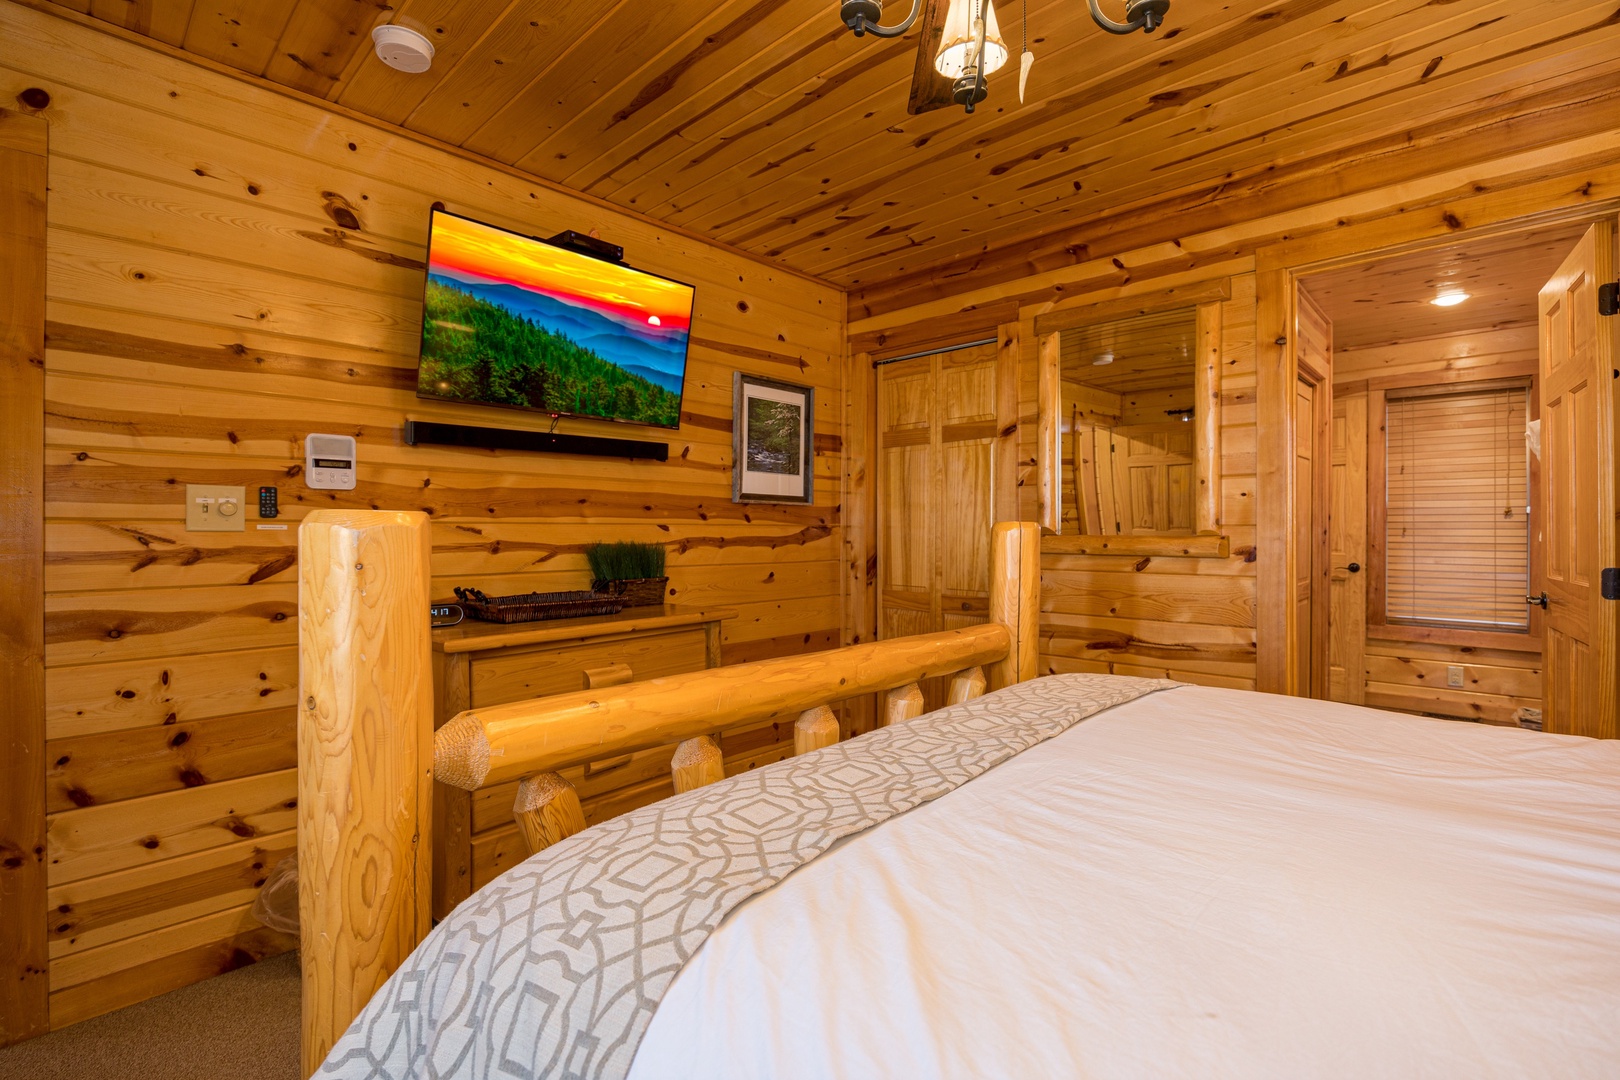 Bedroom flat screen at Gone To Therapy, a 2 bedroom cabin rental located in Gatlinburg